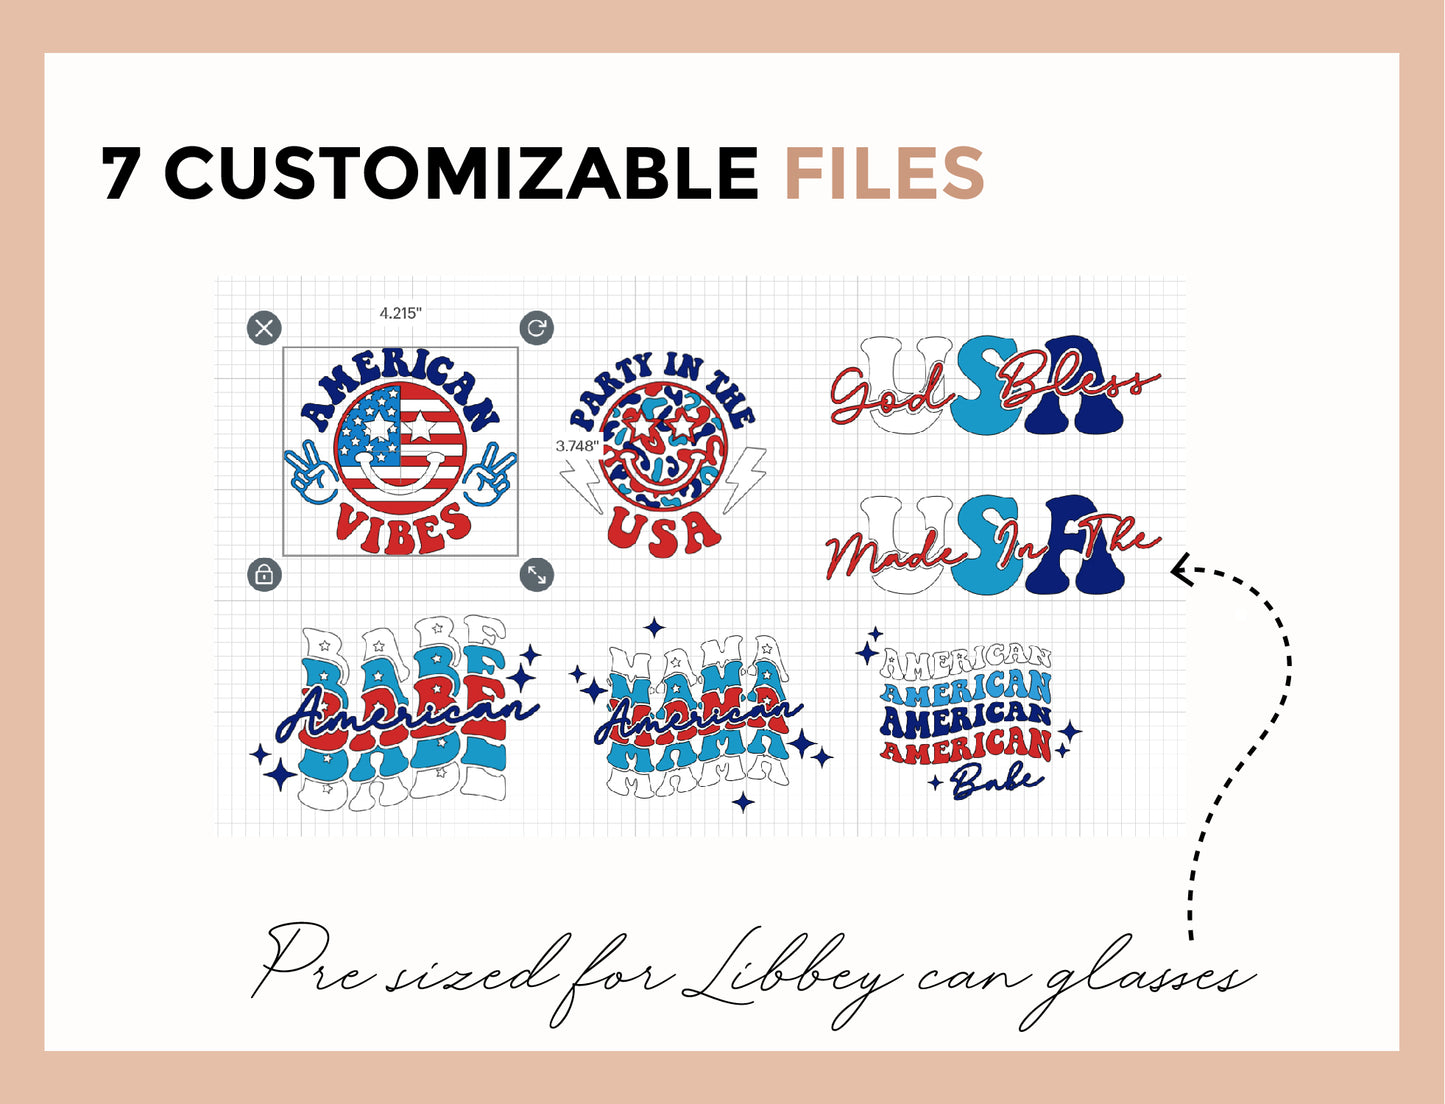 Retro 4th Of July Decal Bundle